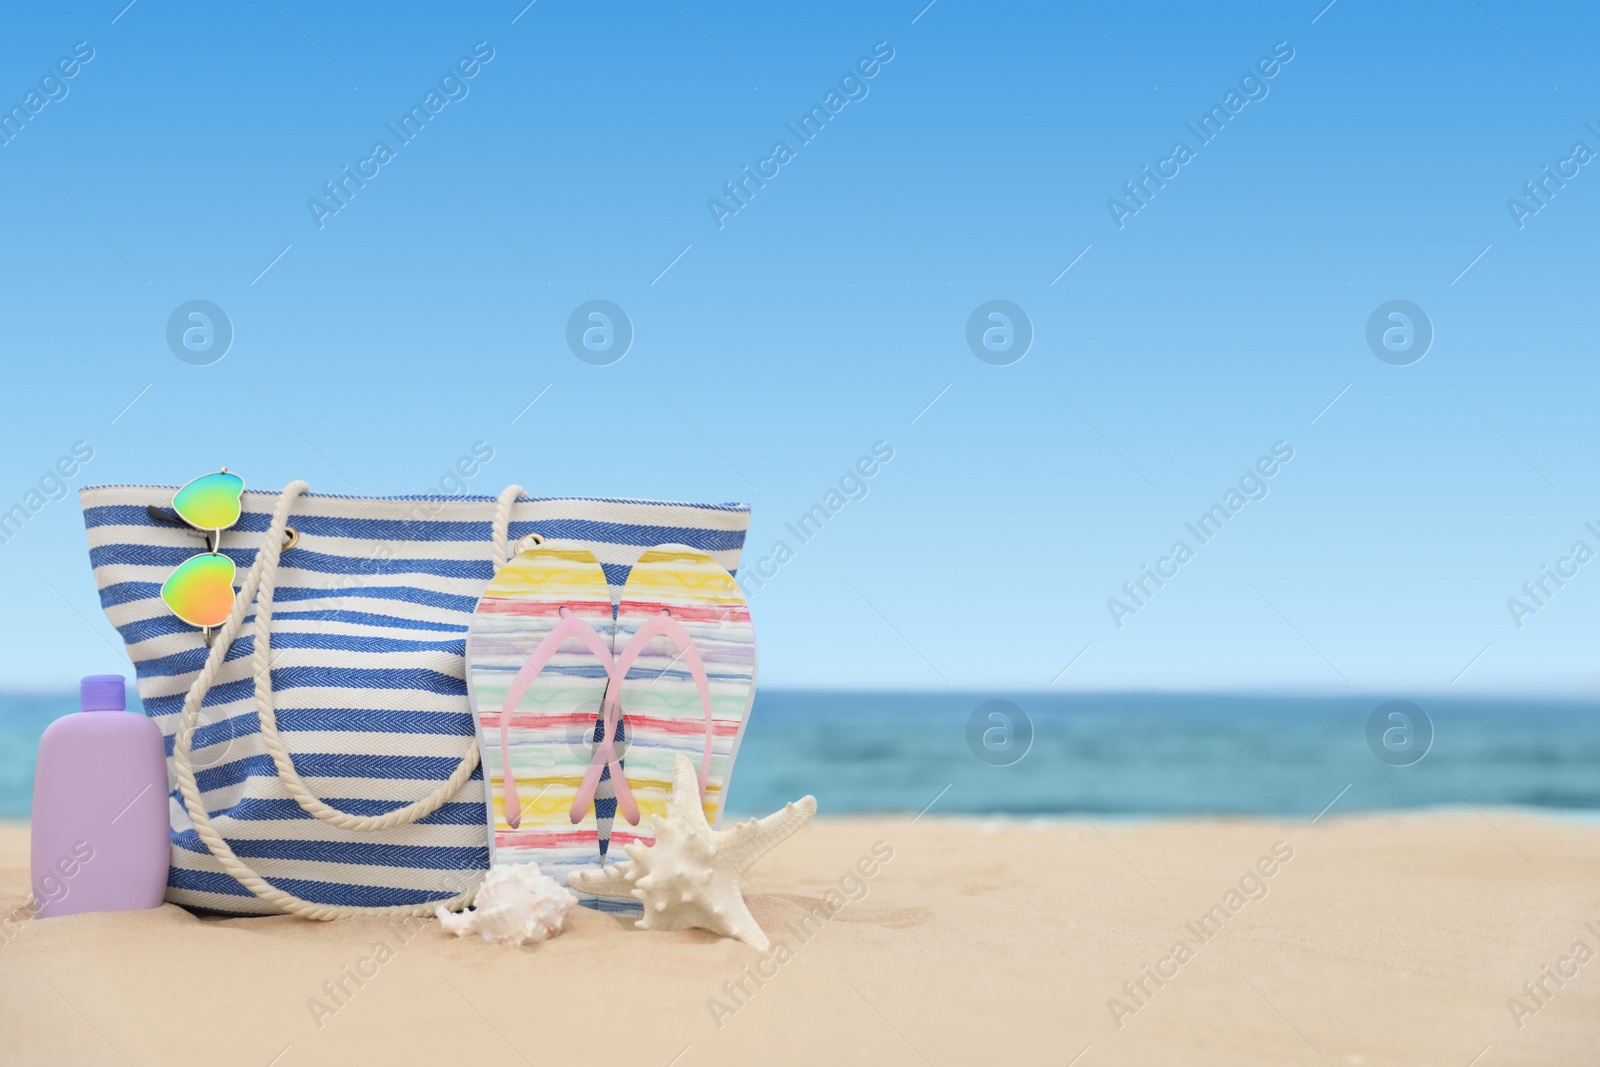 Photo of Bag and beach objects on sand near sea, space for text